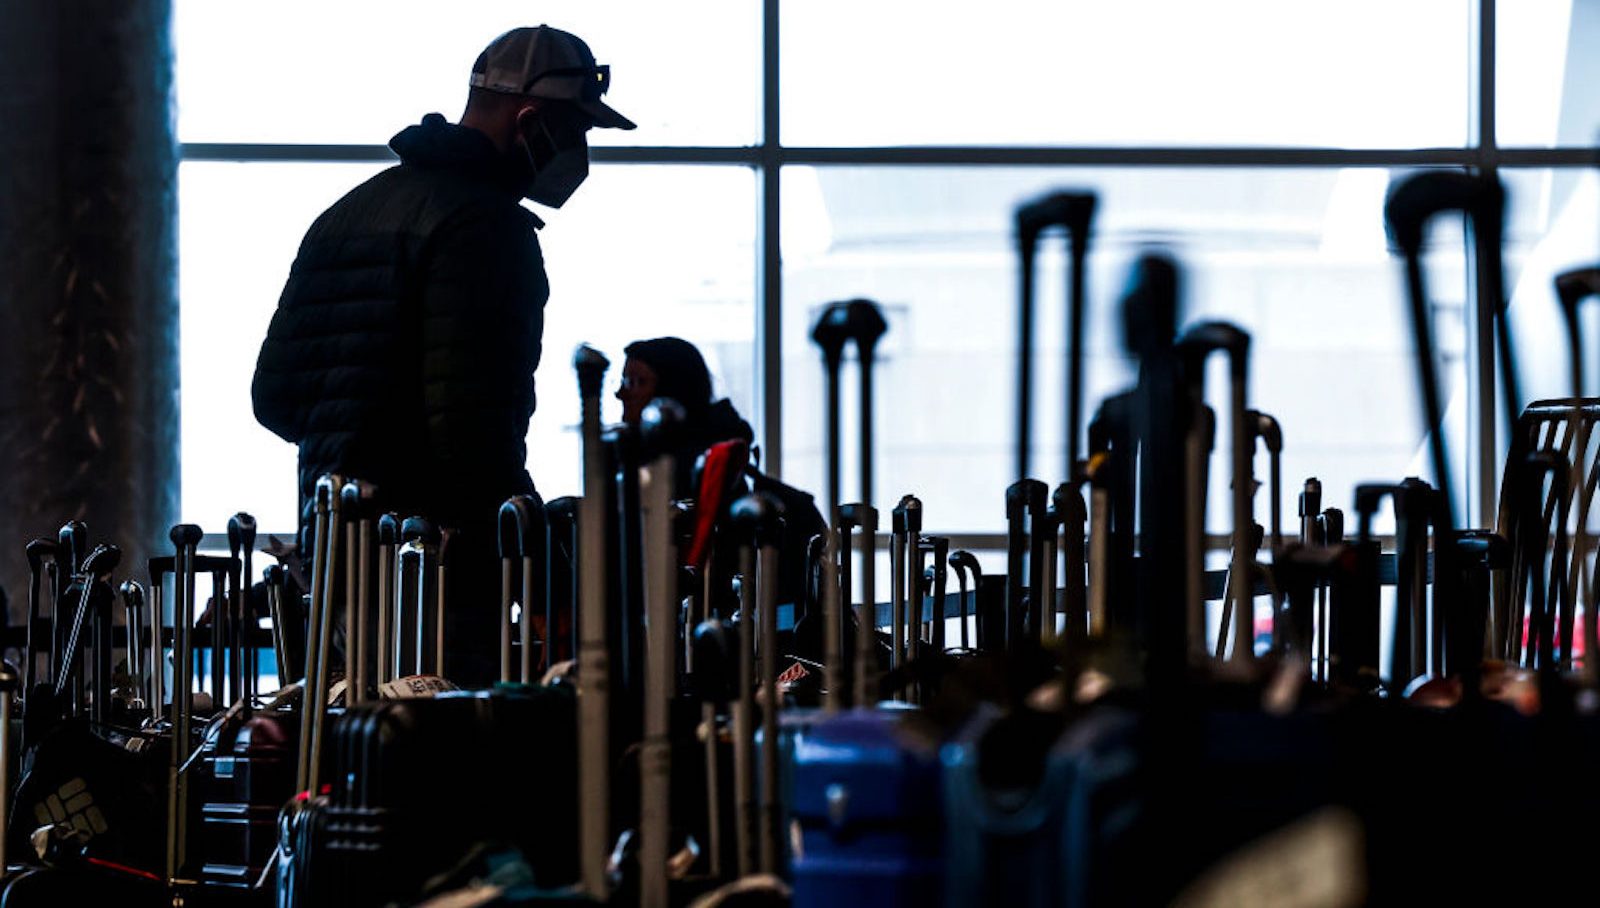 More than 1,600 flights have been canceled in the United States due to the winter storm